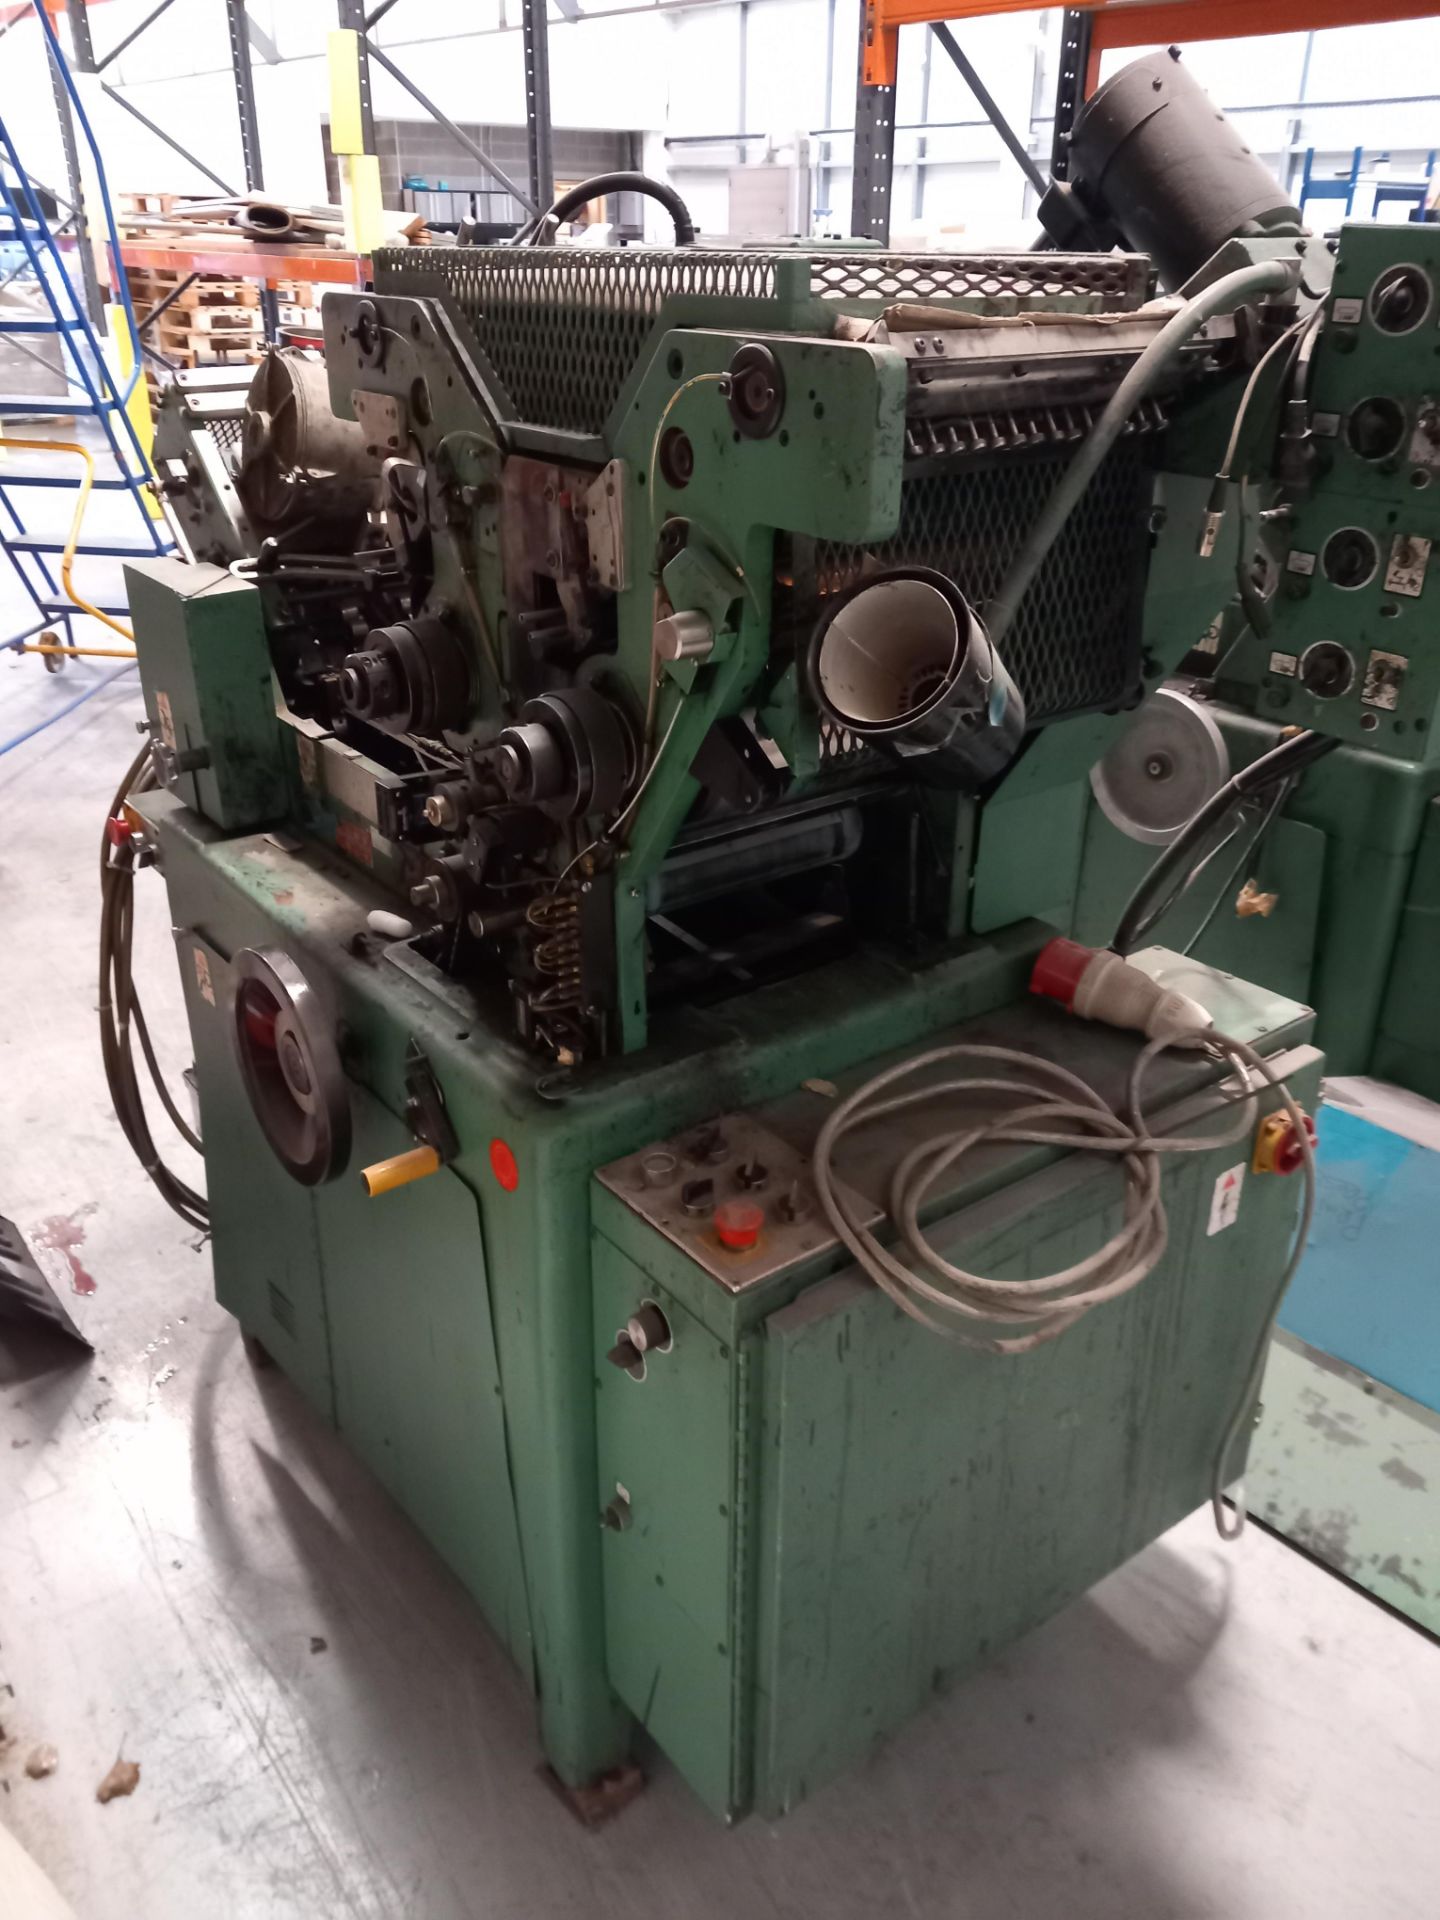 3 Halm jet press machines with selection of spares - Image 9 of 13